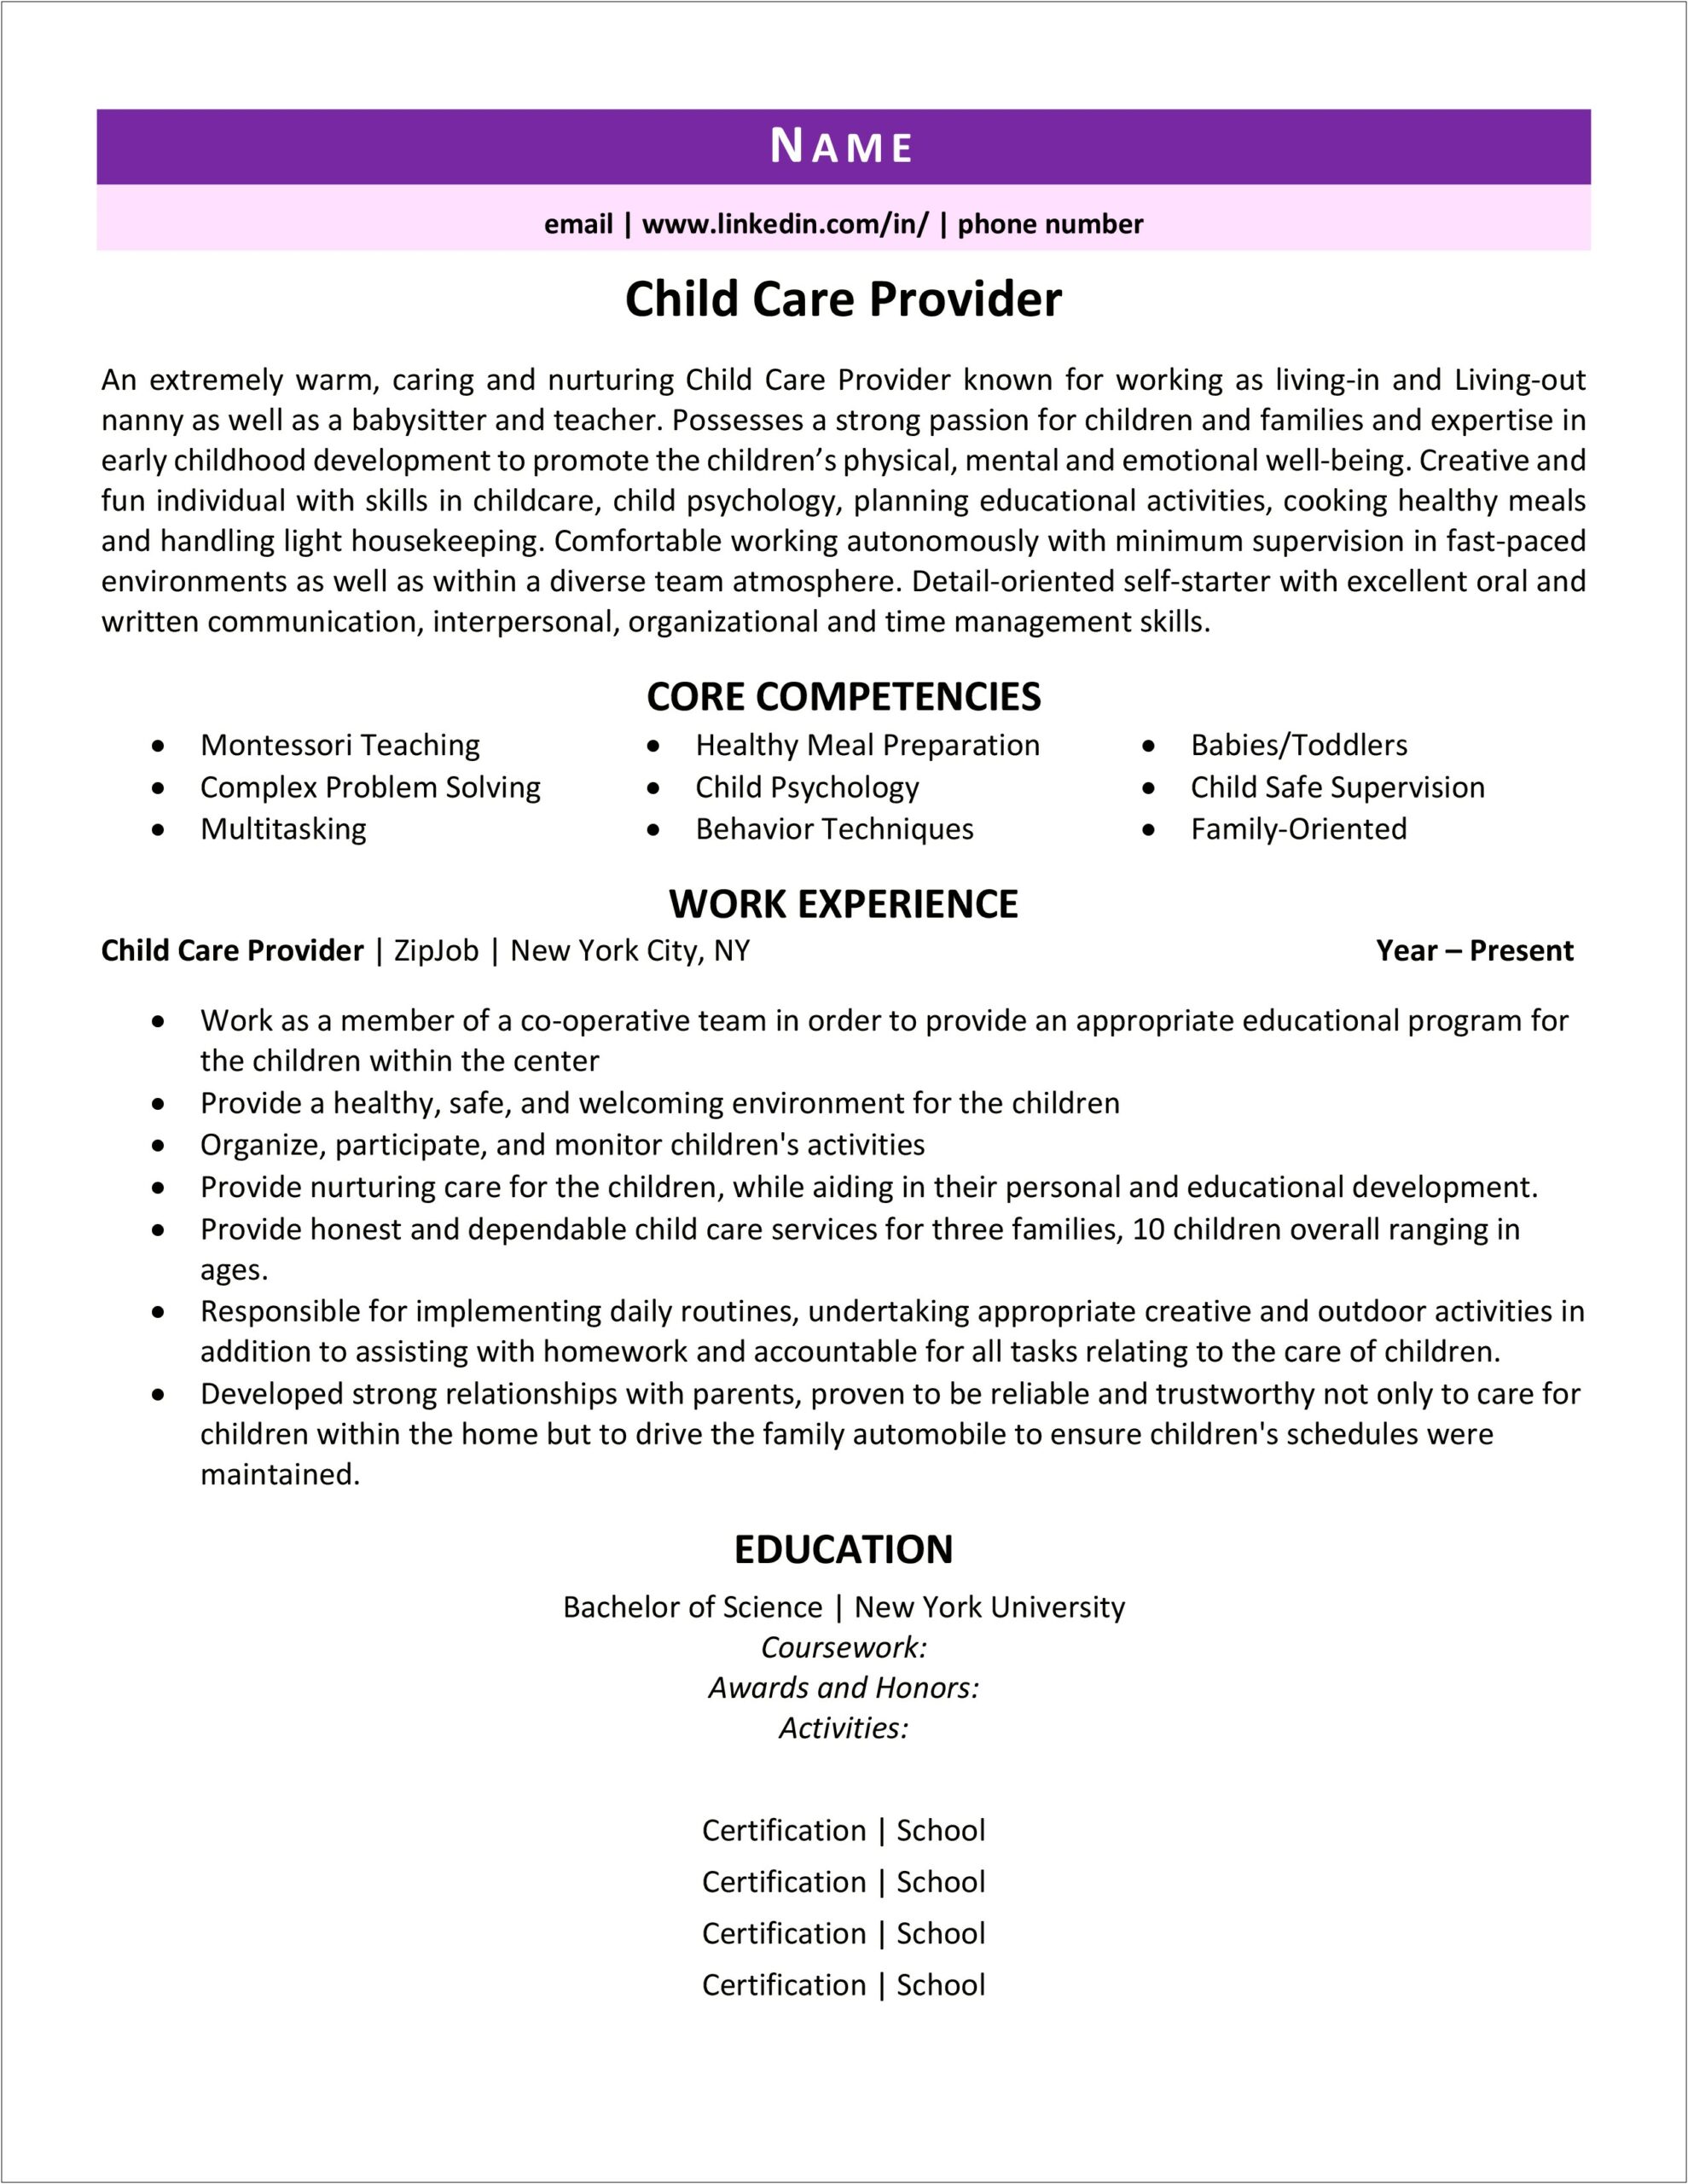 Examples Of Child Care Worker Resumes